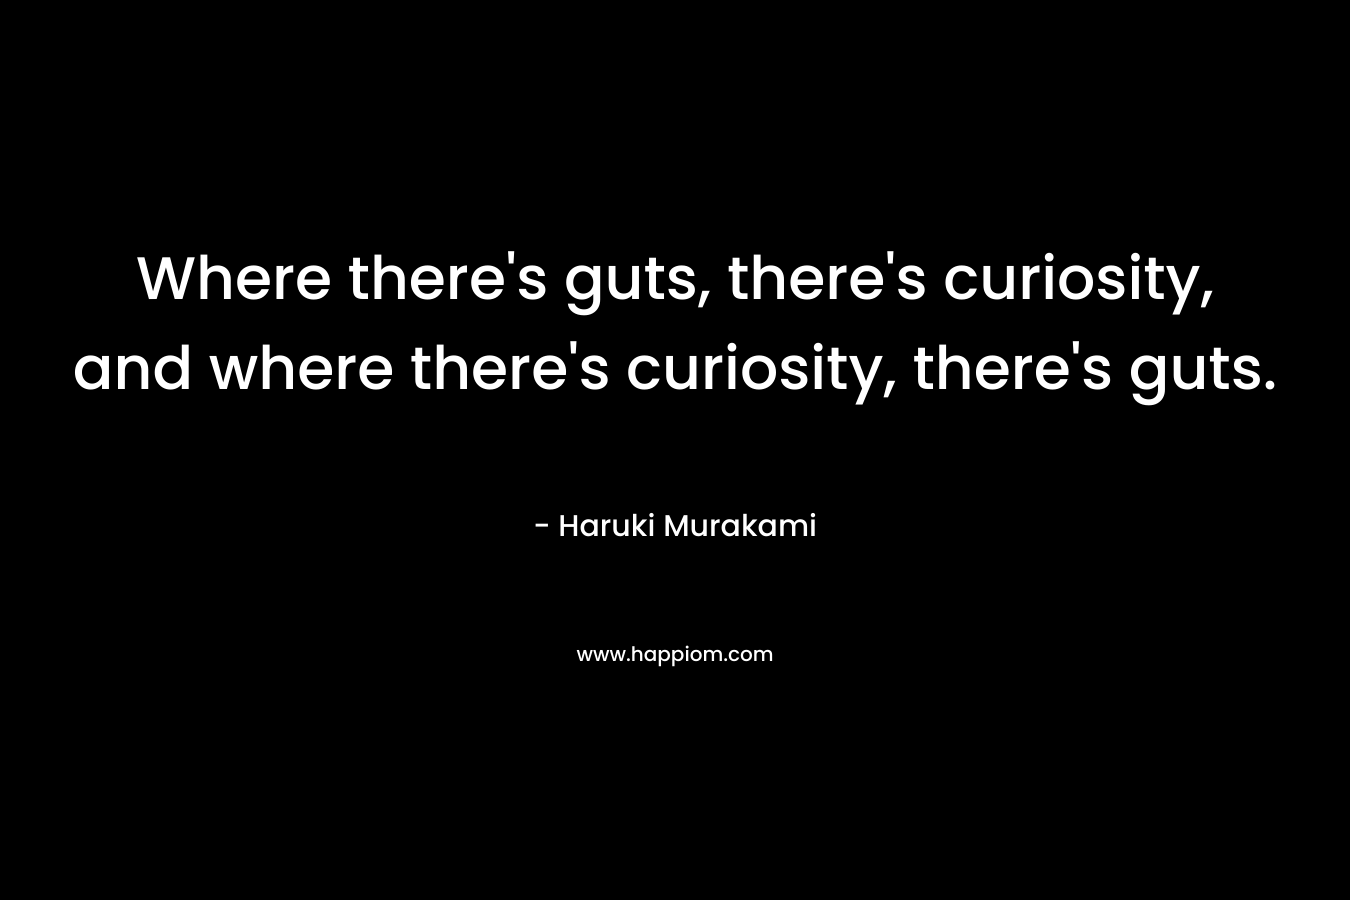 Where there's guts, there's curiosity, and where there's curiosity, there's guts.